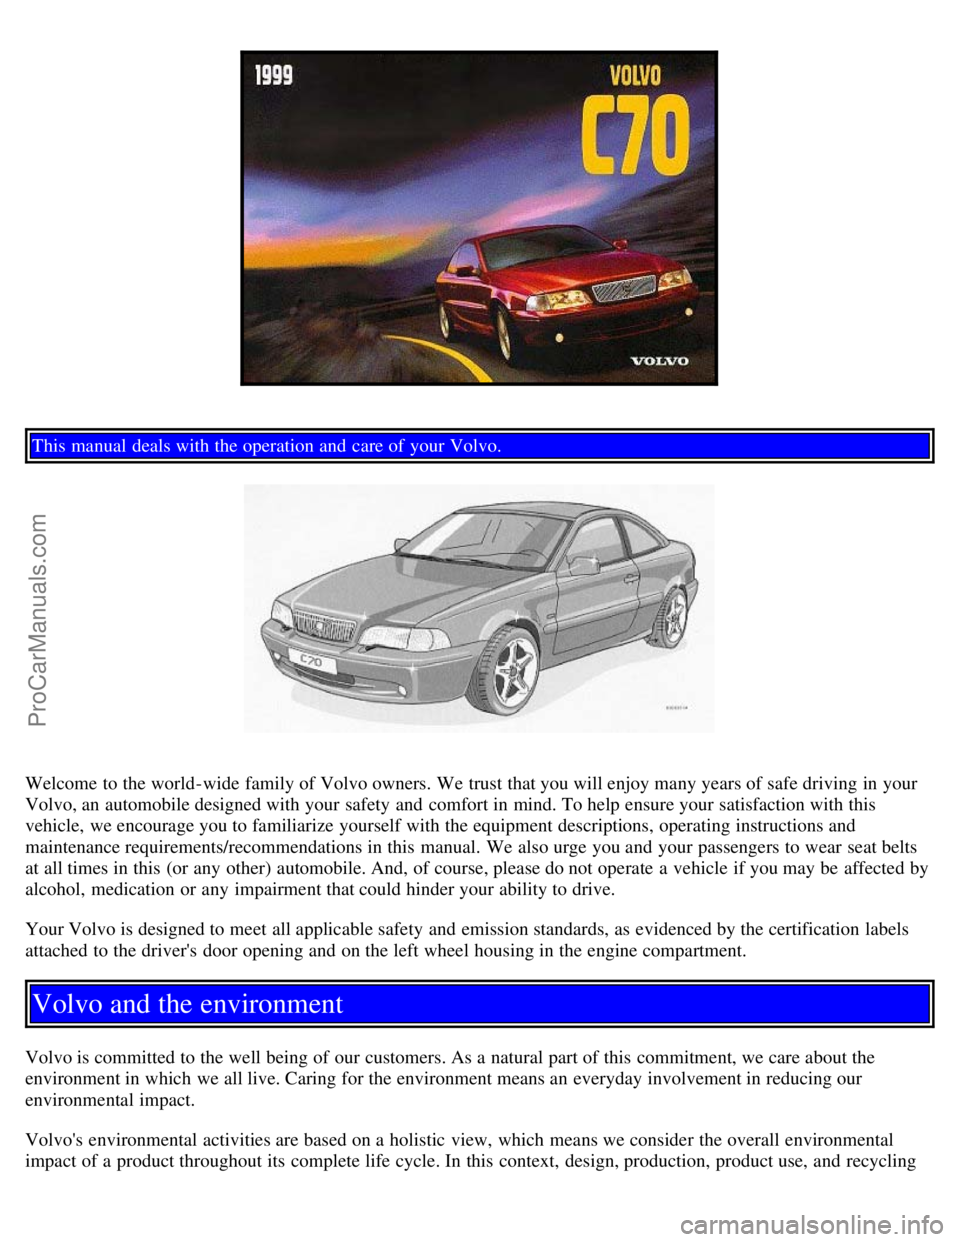 VOLVO C70 1999  Owners Manual This manual  deals with the operation and  care of your Volvo.
Welcome to the world-wide  family of Volvo owners. We trust that you will enjoy many years of safe driving in your
Volvo, an  automobile 